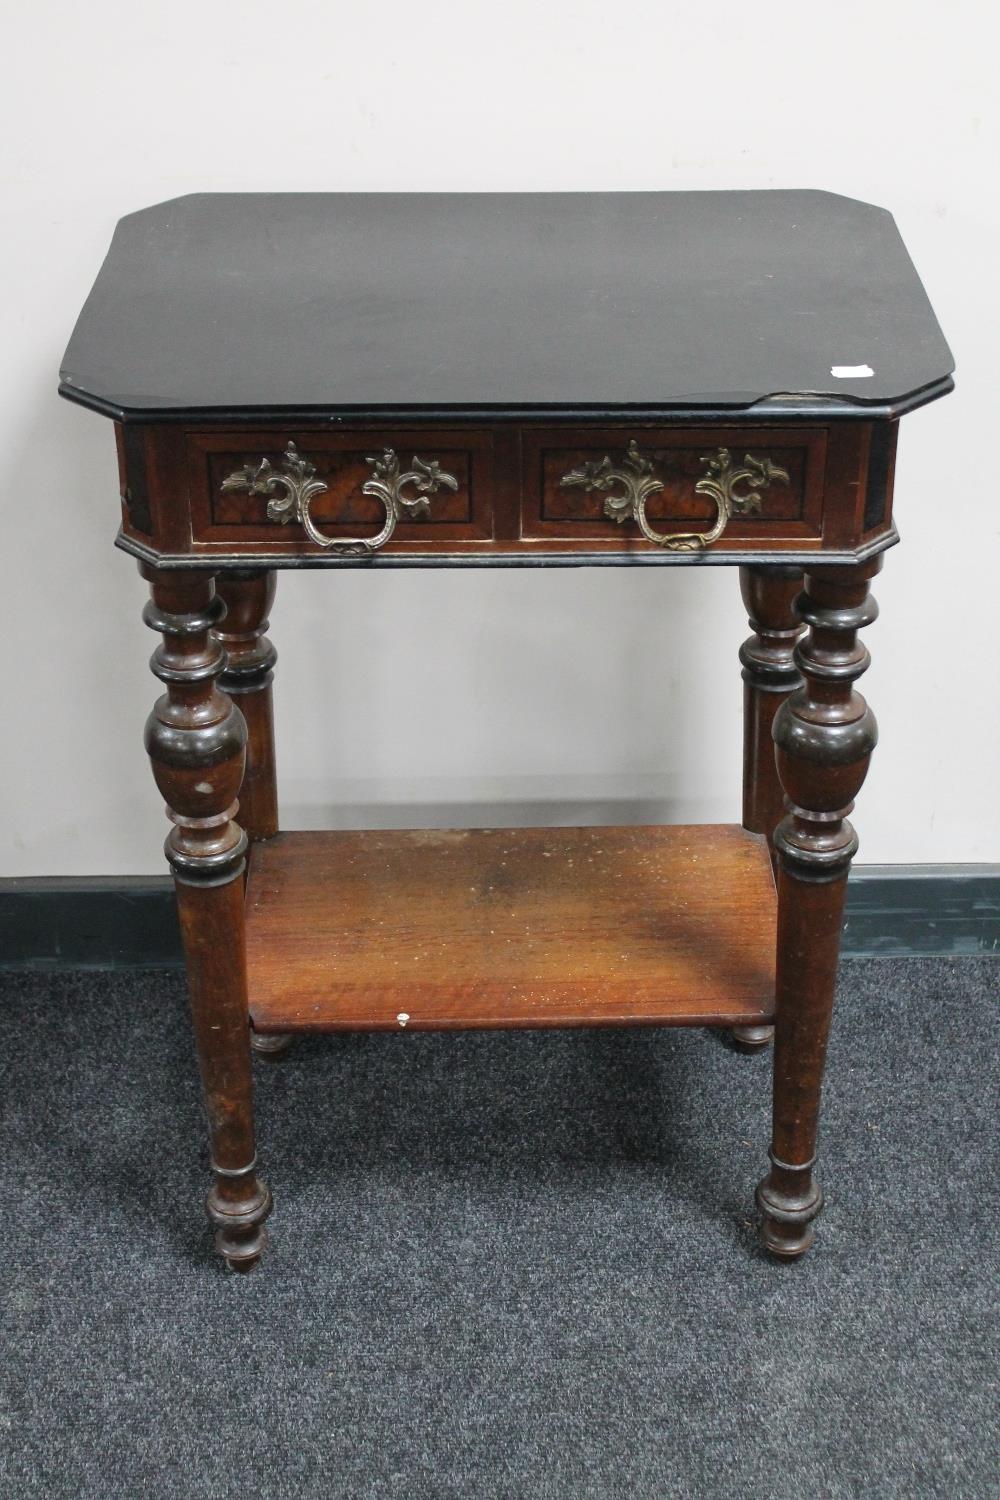 An antique continental mahogany two drawer side table with ornate handles